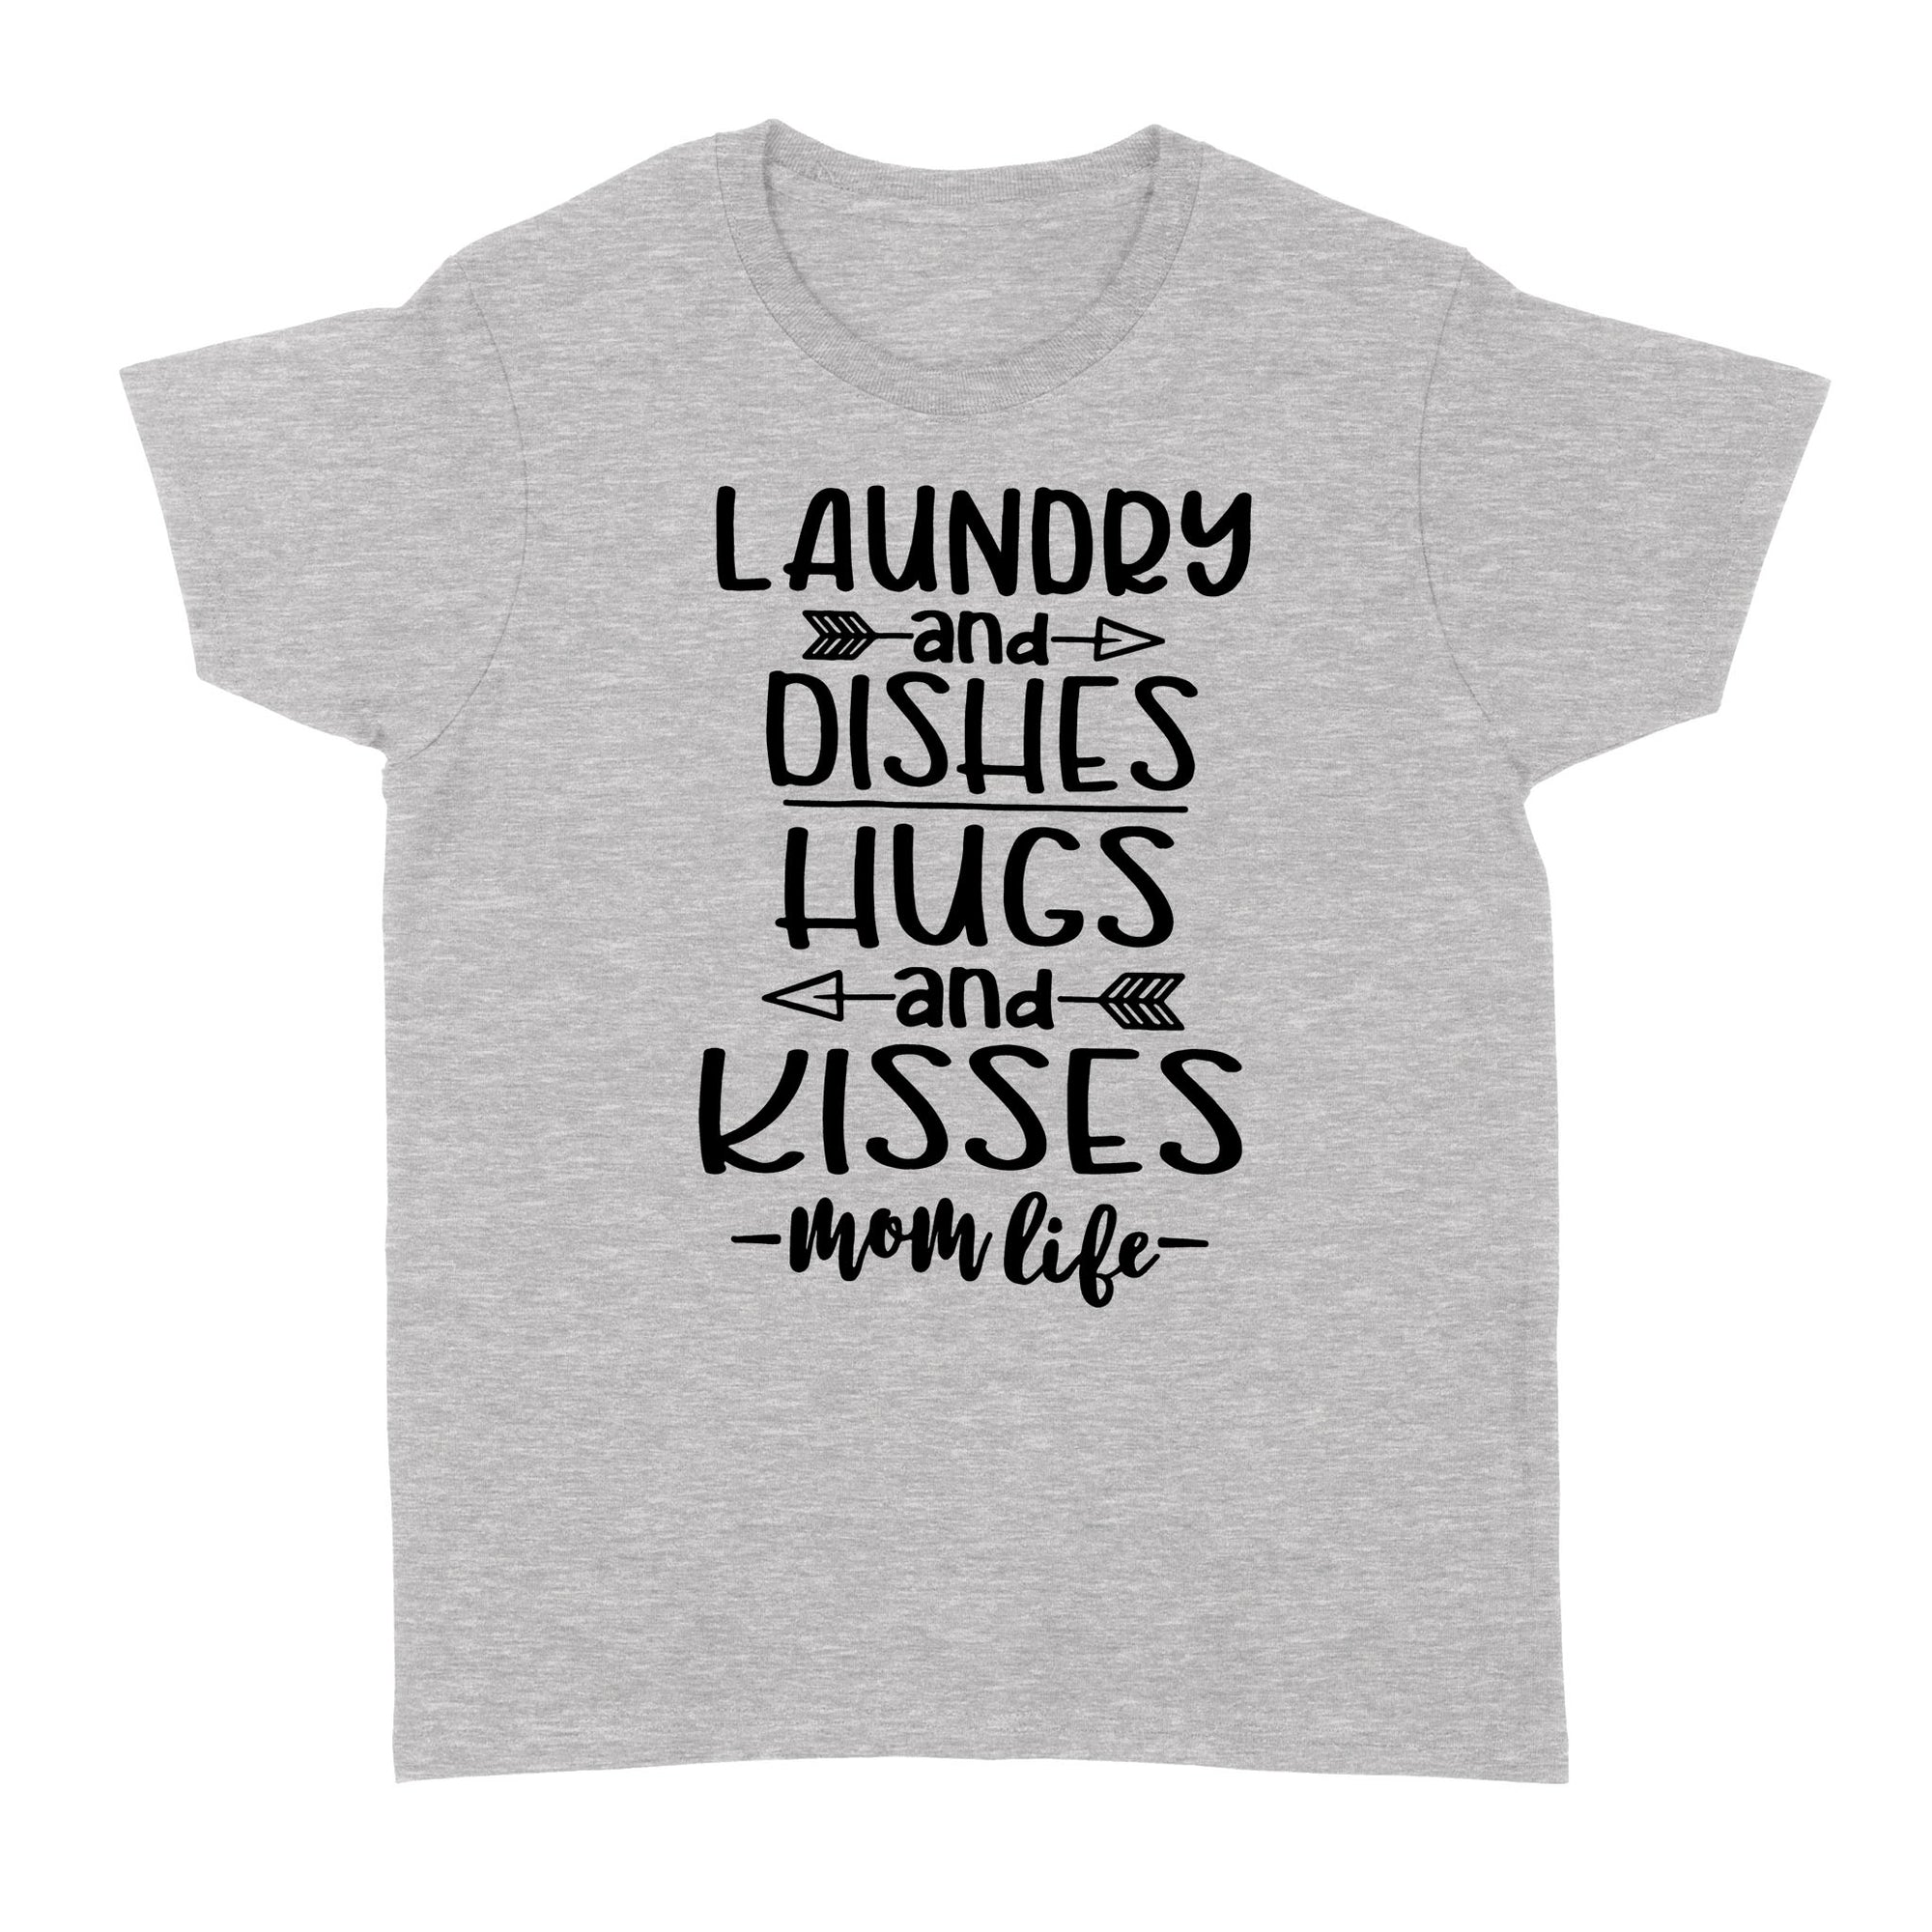 Gift Ideas for Mom Mothers Day Laundry And Dishes Hugs And Kisses MomLife W - Standard Women's T-shirt